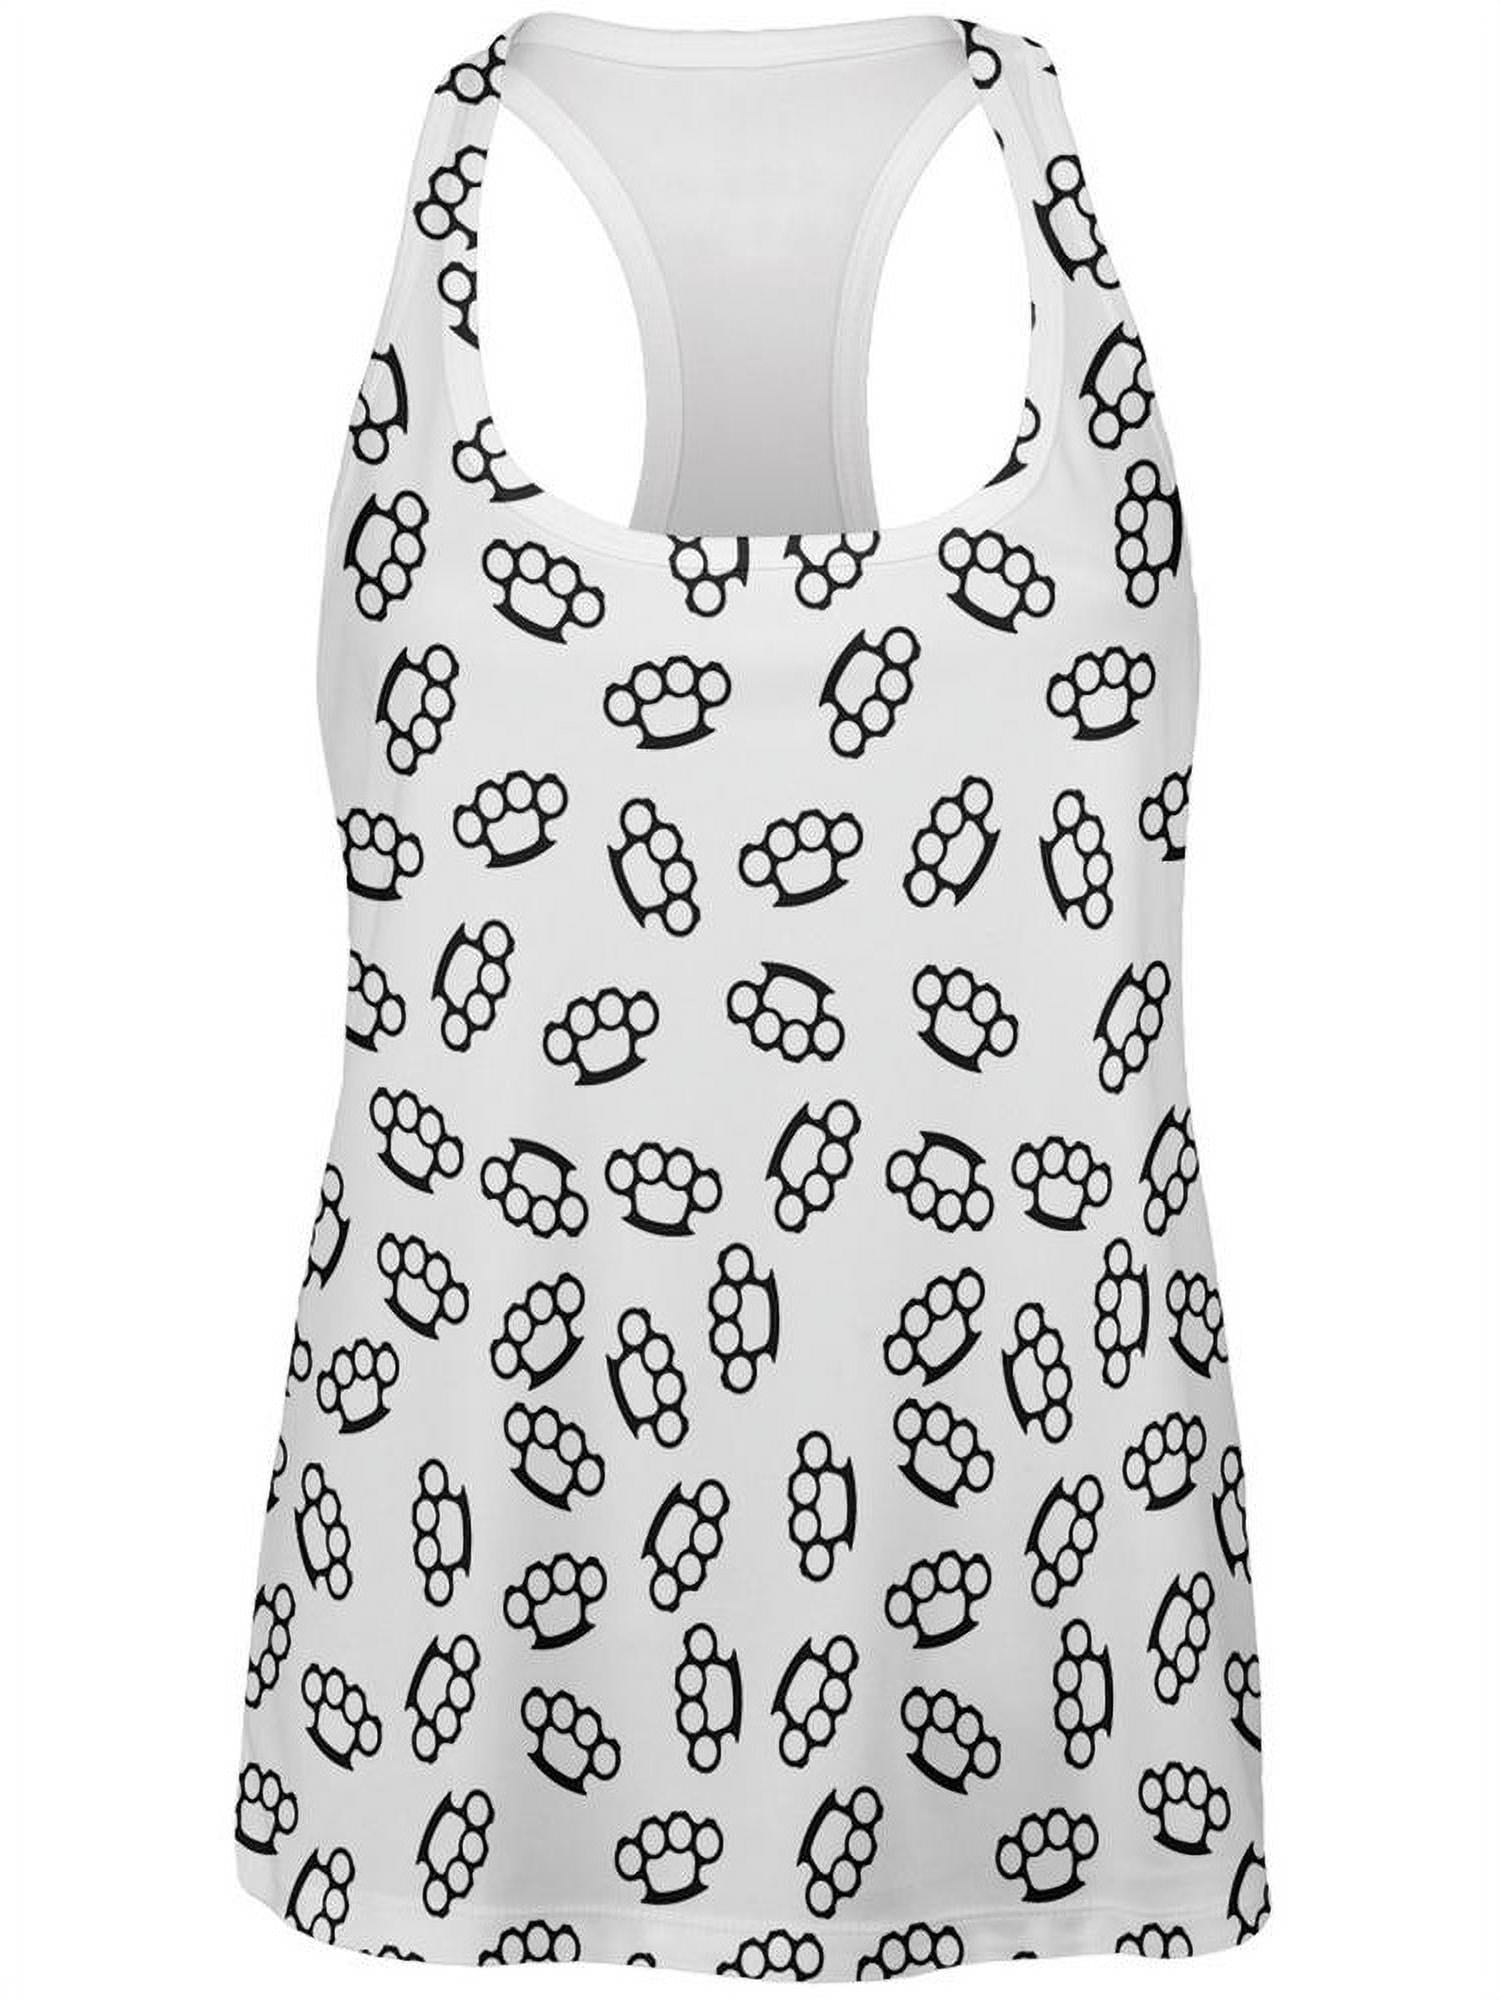 Brass Knuckles All Over Womens Racerback Tank Top - Small 